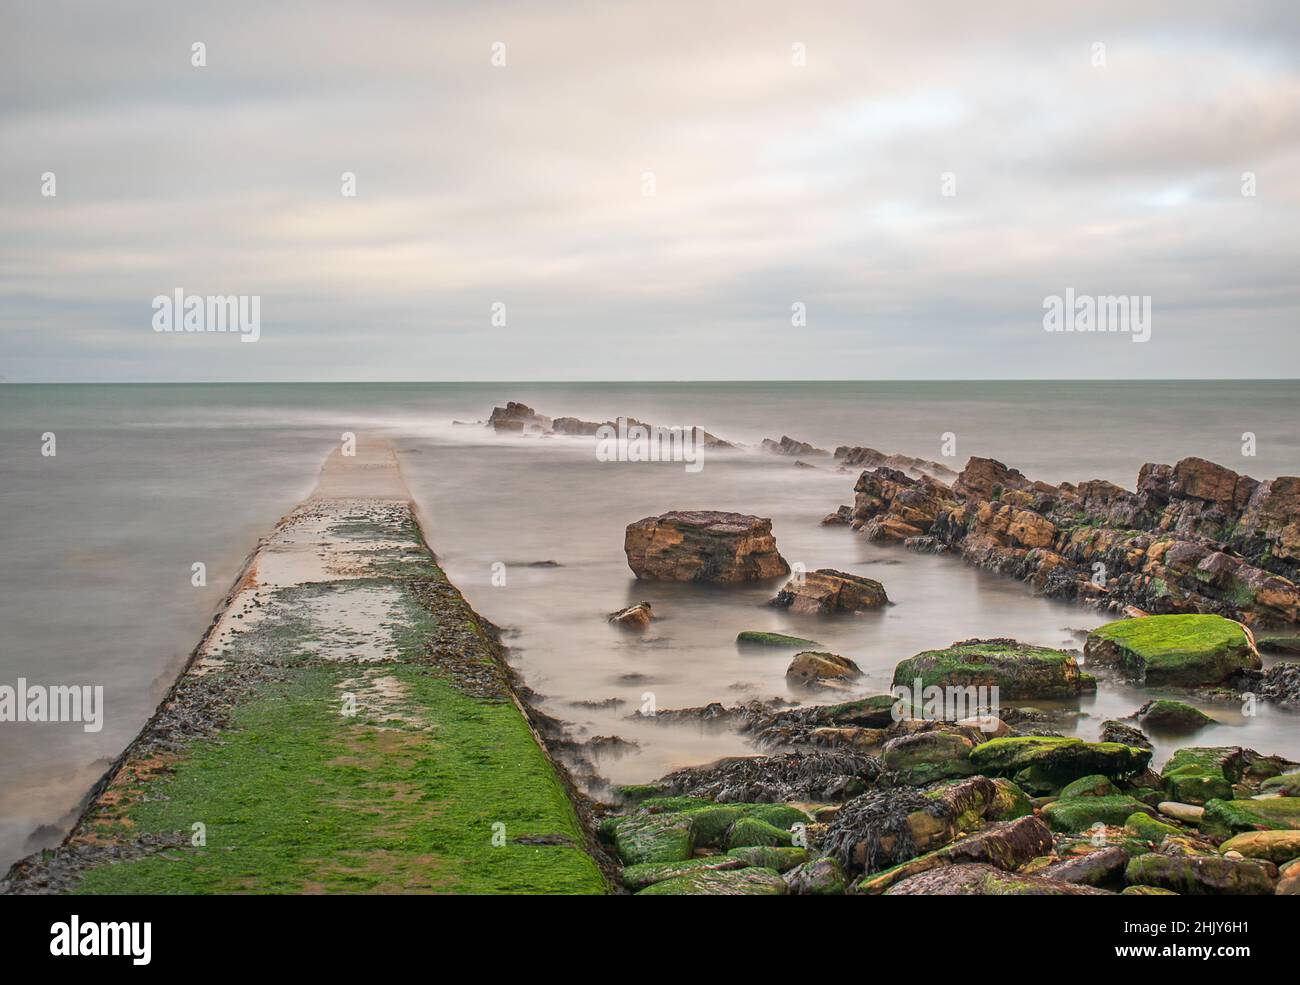 A slow shutter exposure of the sunken walkway at Swanage Peveril Point and the rocks in the still milky sea Stock Photo